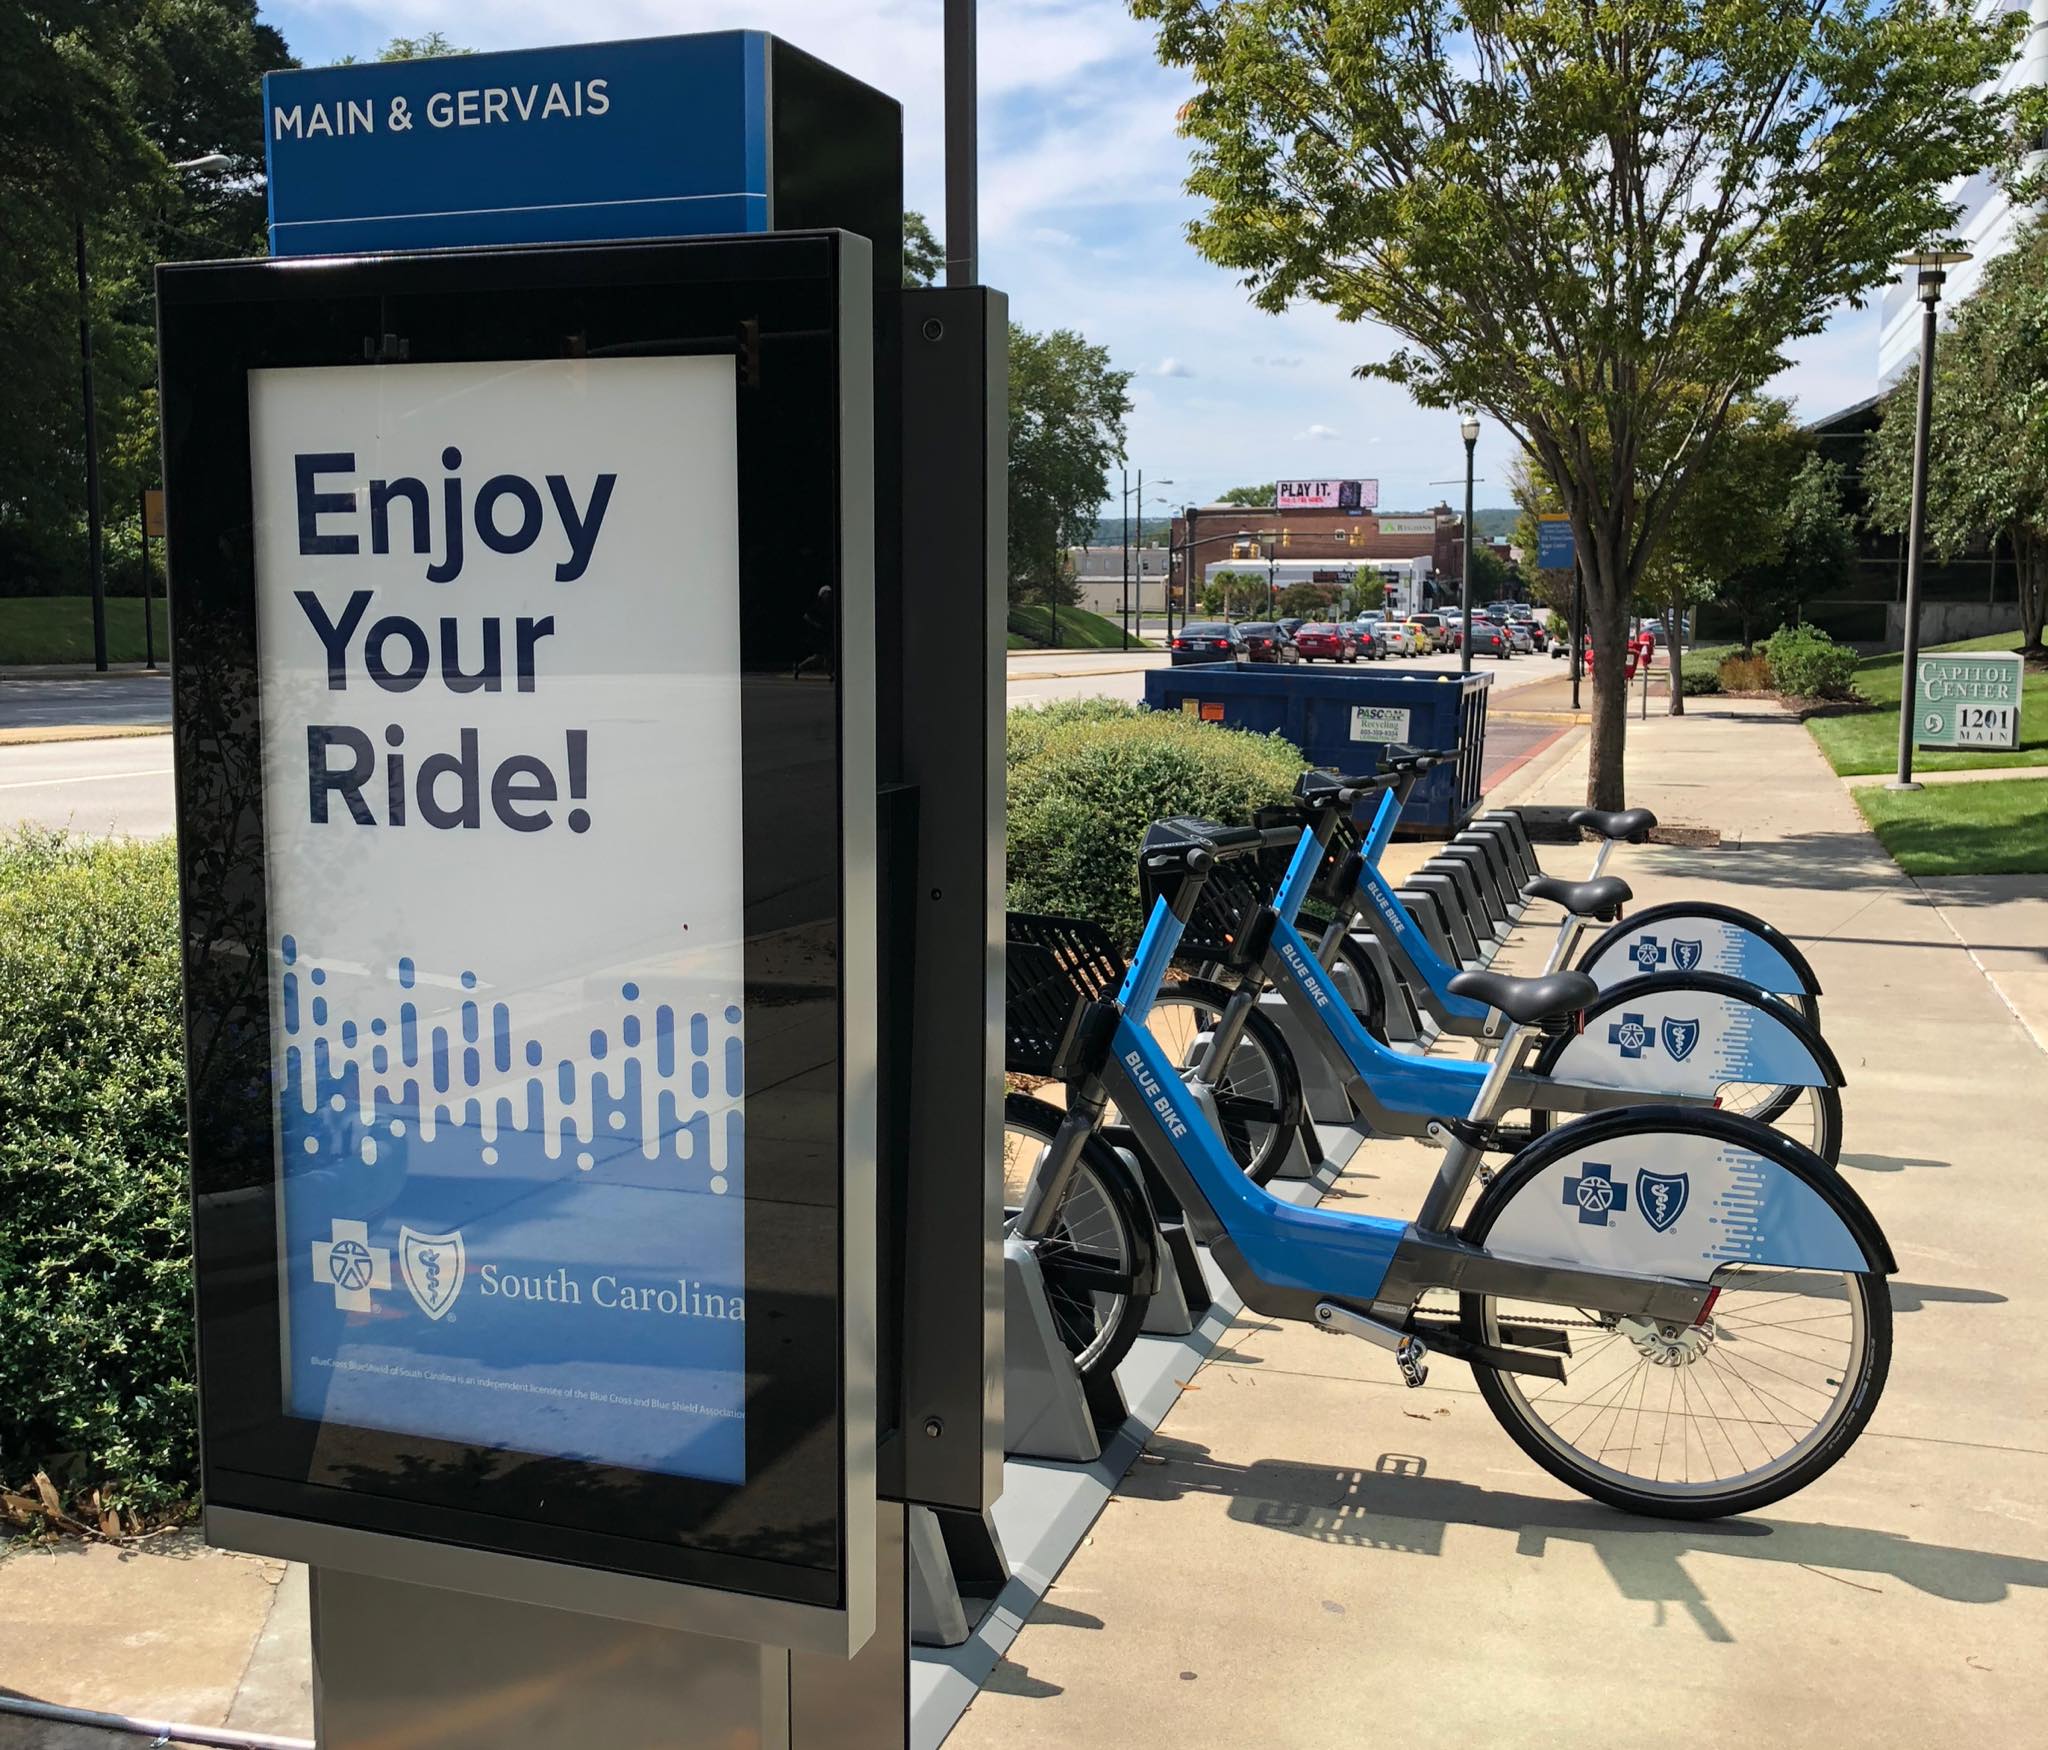 Blue Bikes docked at a station next to a sign that says Enjoy your ride!